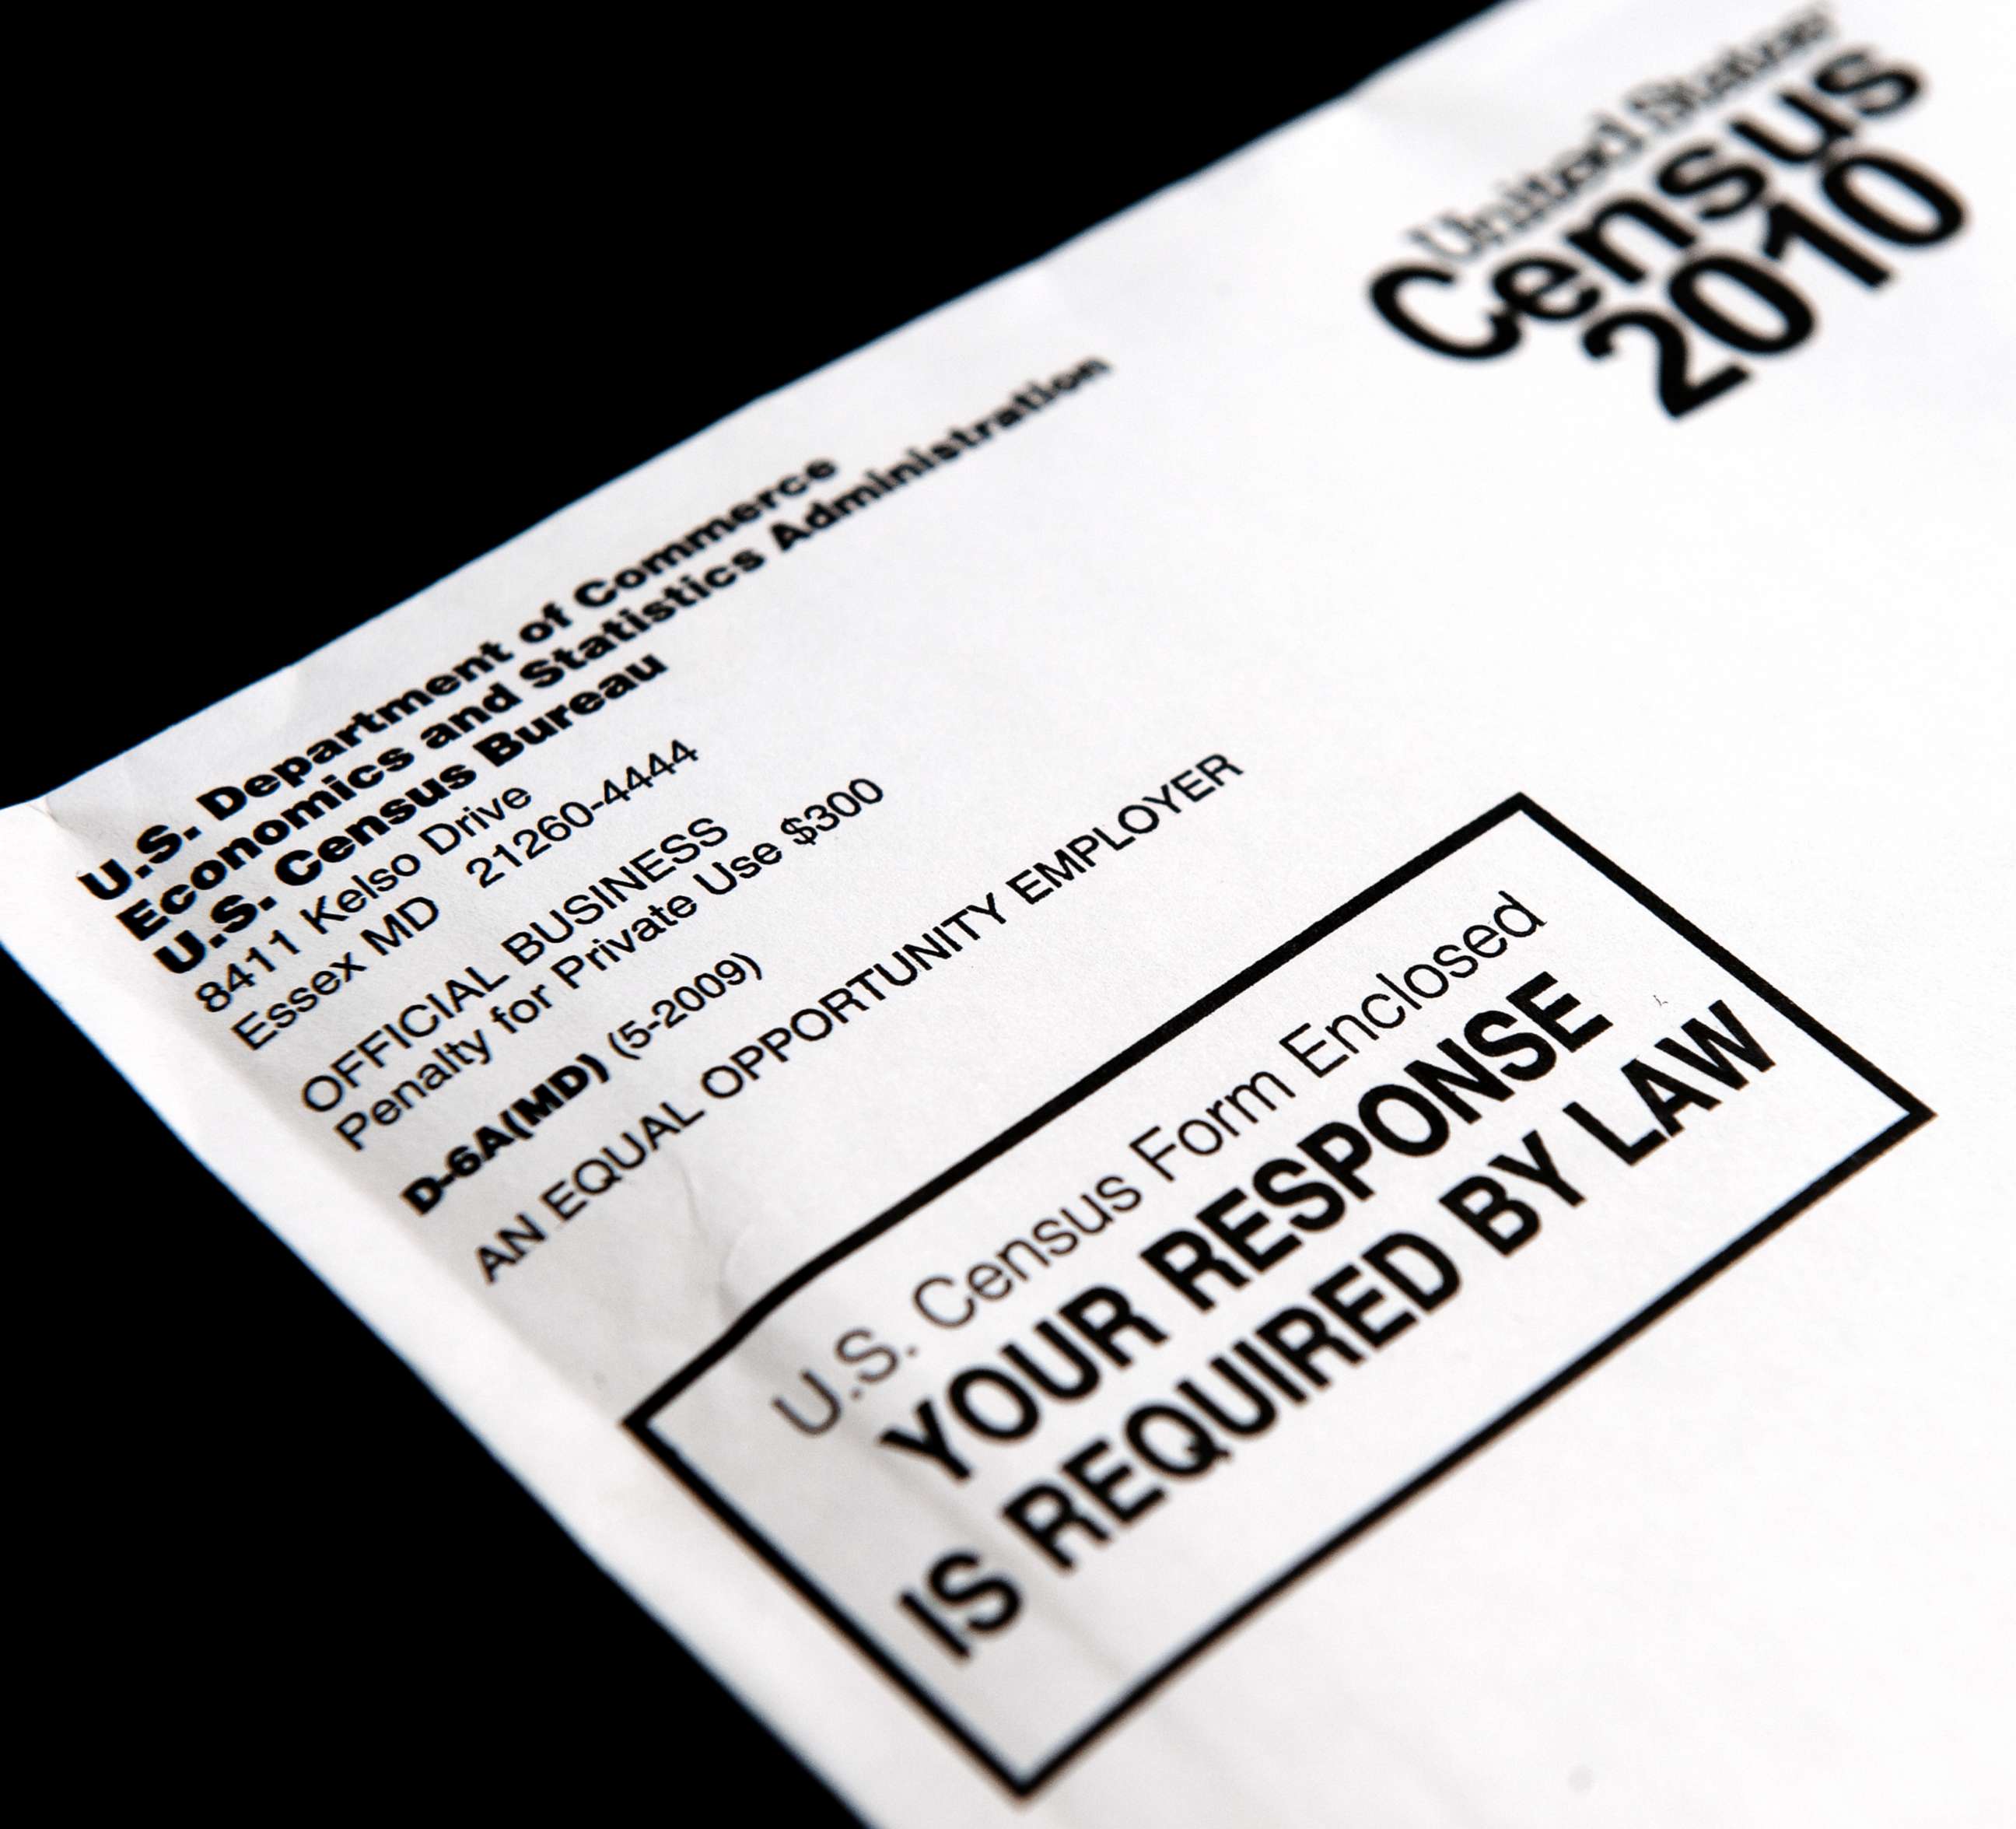 PHOTO: The official U.S. Census form is pictured on March 18, 2010 in Washington, D.C.